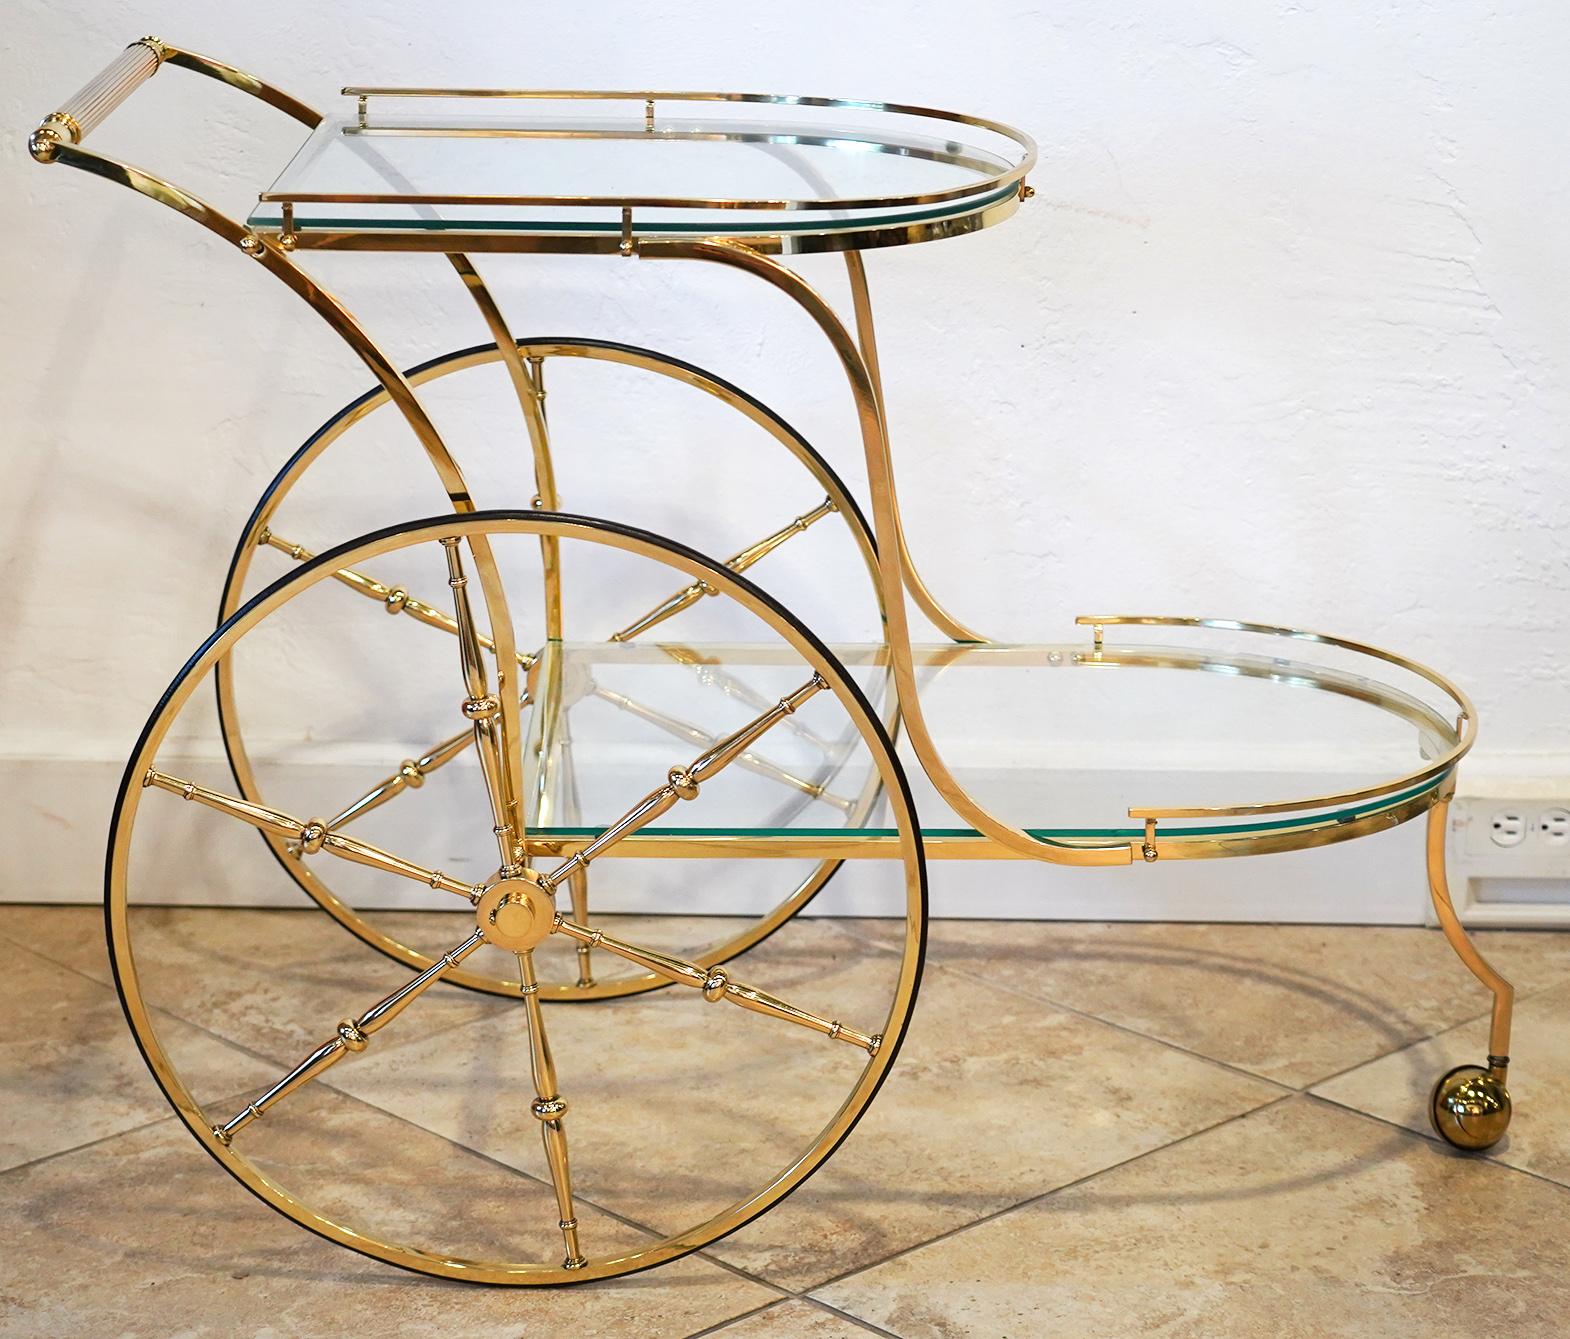 This artfully crafted vintage brass bar cart with two galleried glass levels feature two large wheels and one front coaster. It is an elegant design with lots of space for large bottles and accessories.